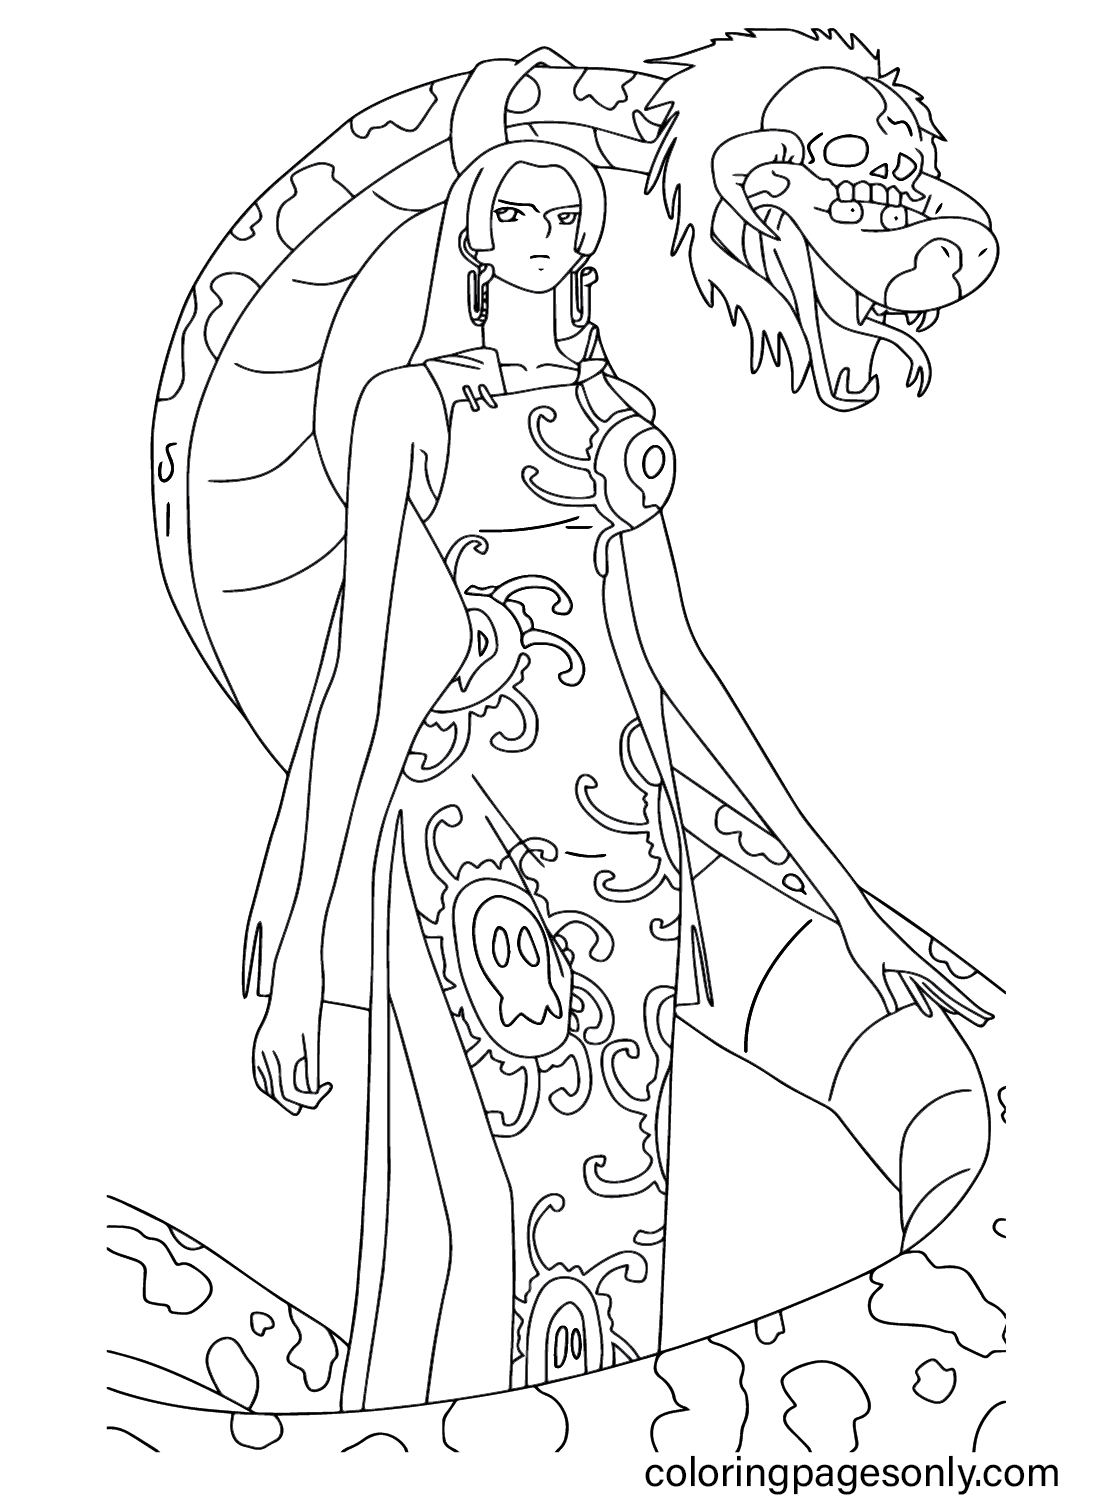 Boa Hancock Coloring Page PDF - Free Printable Coloring Pages